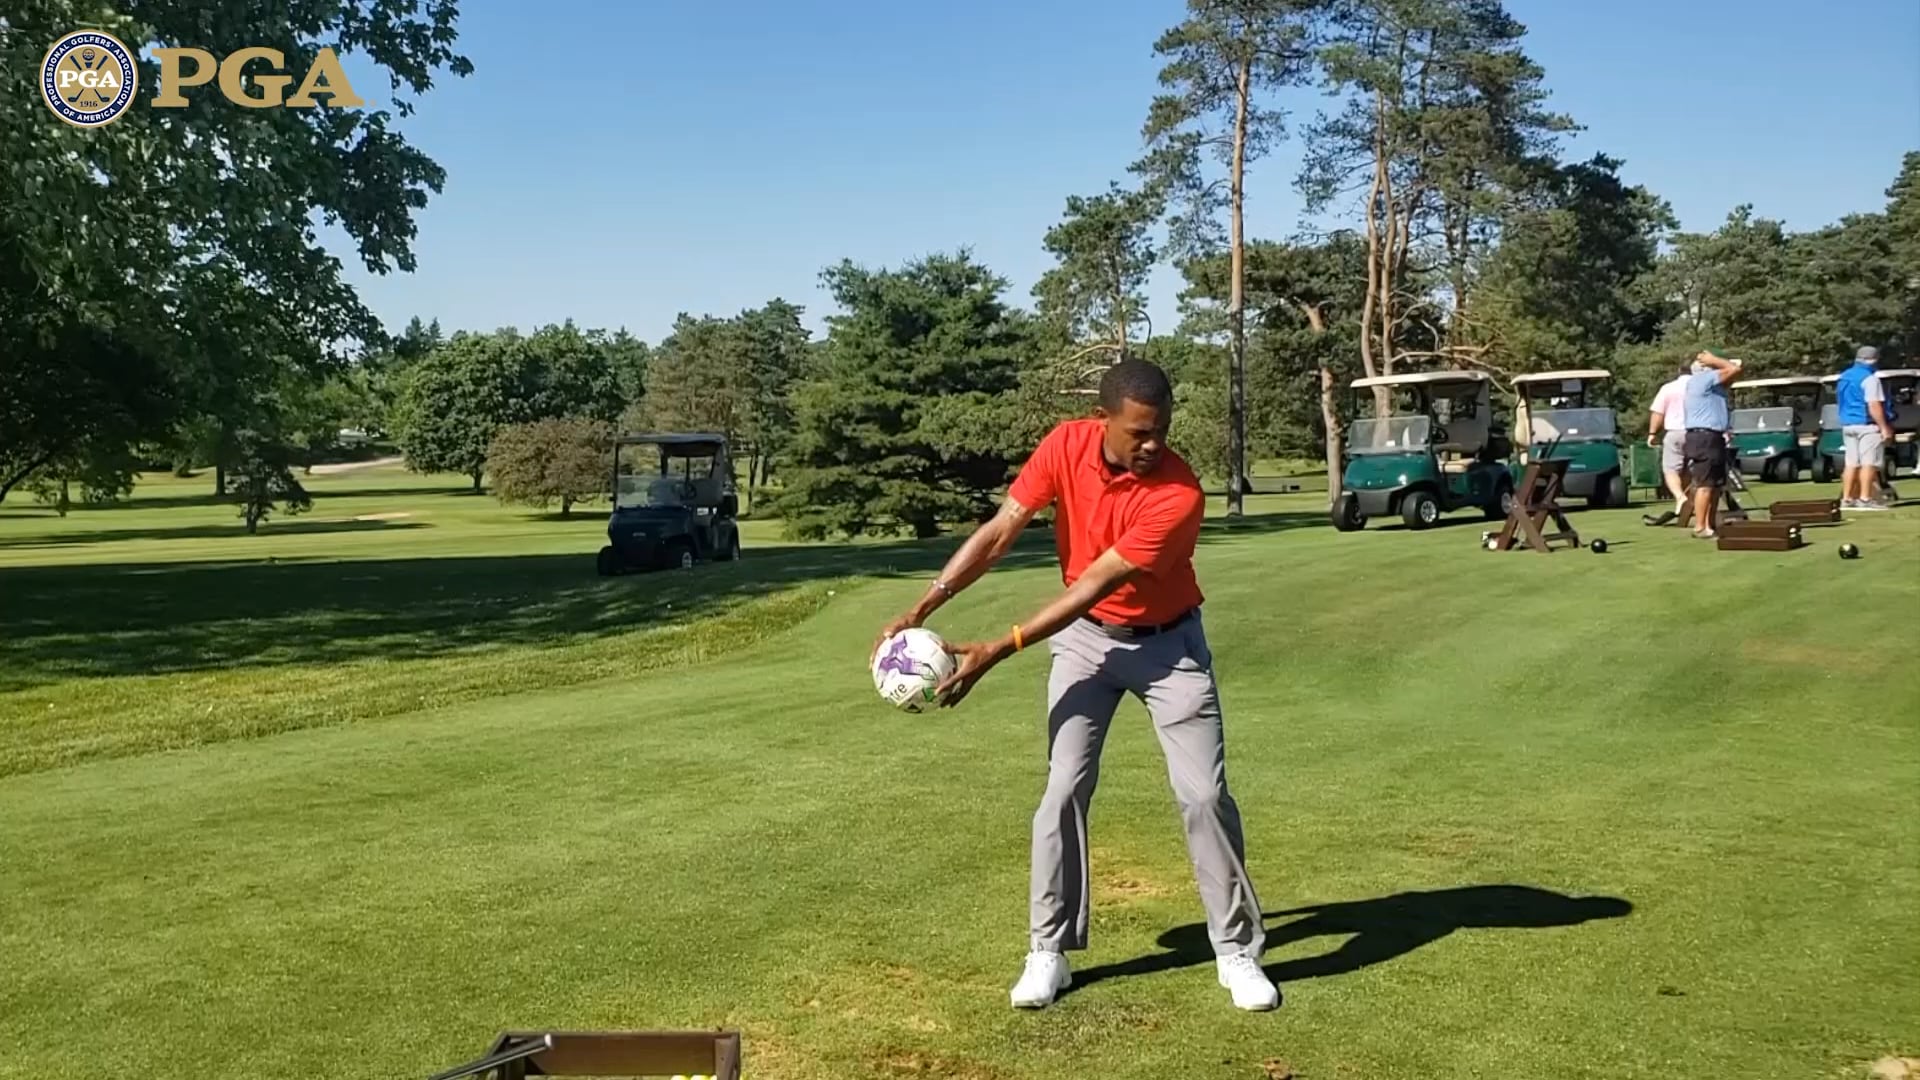 Andre Pillow Golf is a Sport (June 12, 2020) on Vimeo